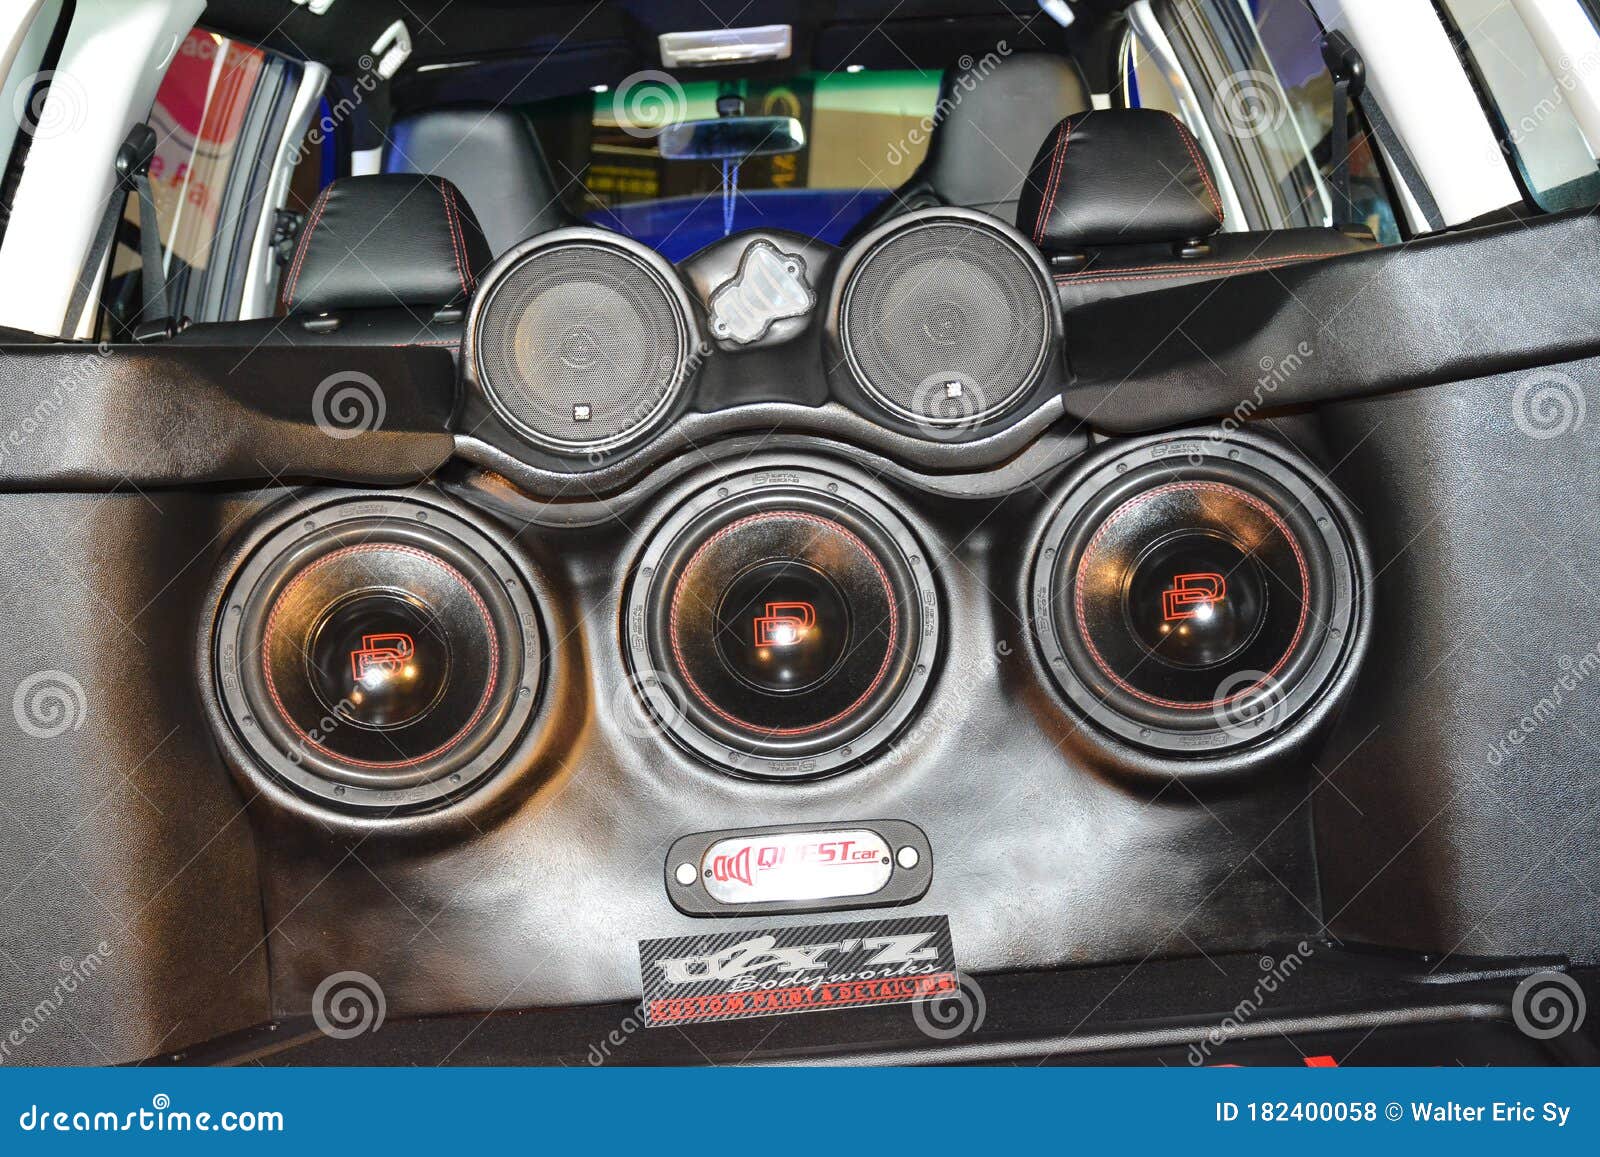 Speaker Sound System at Manila Auto Salon Car Show in Pasay ...